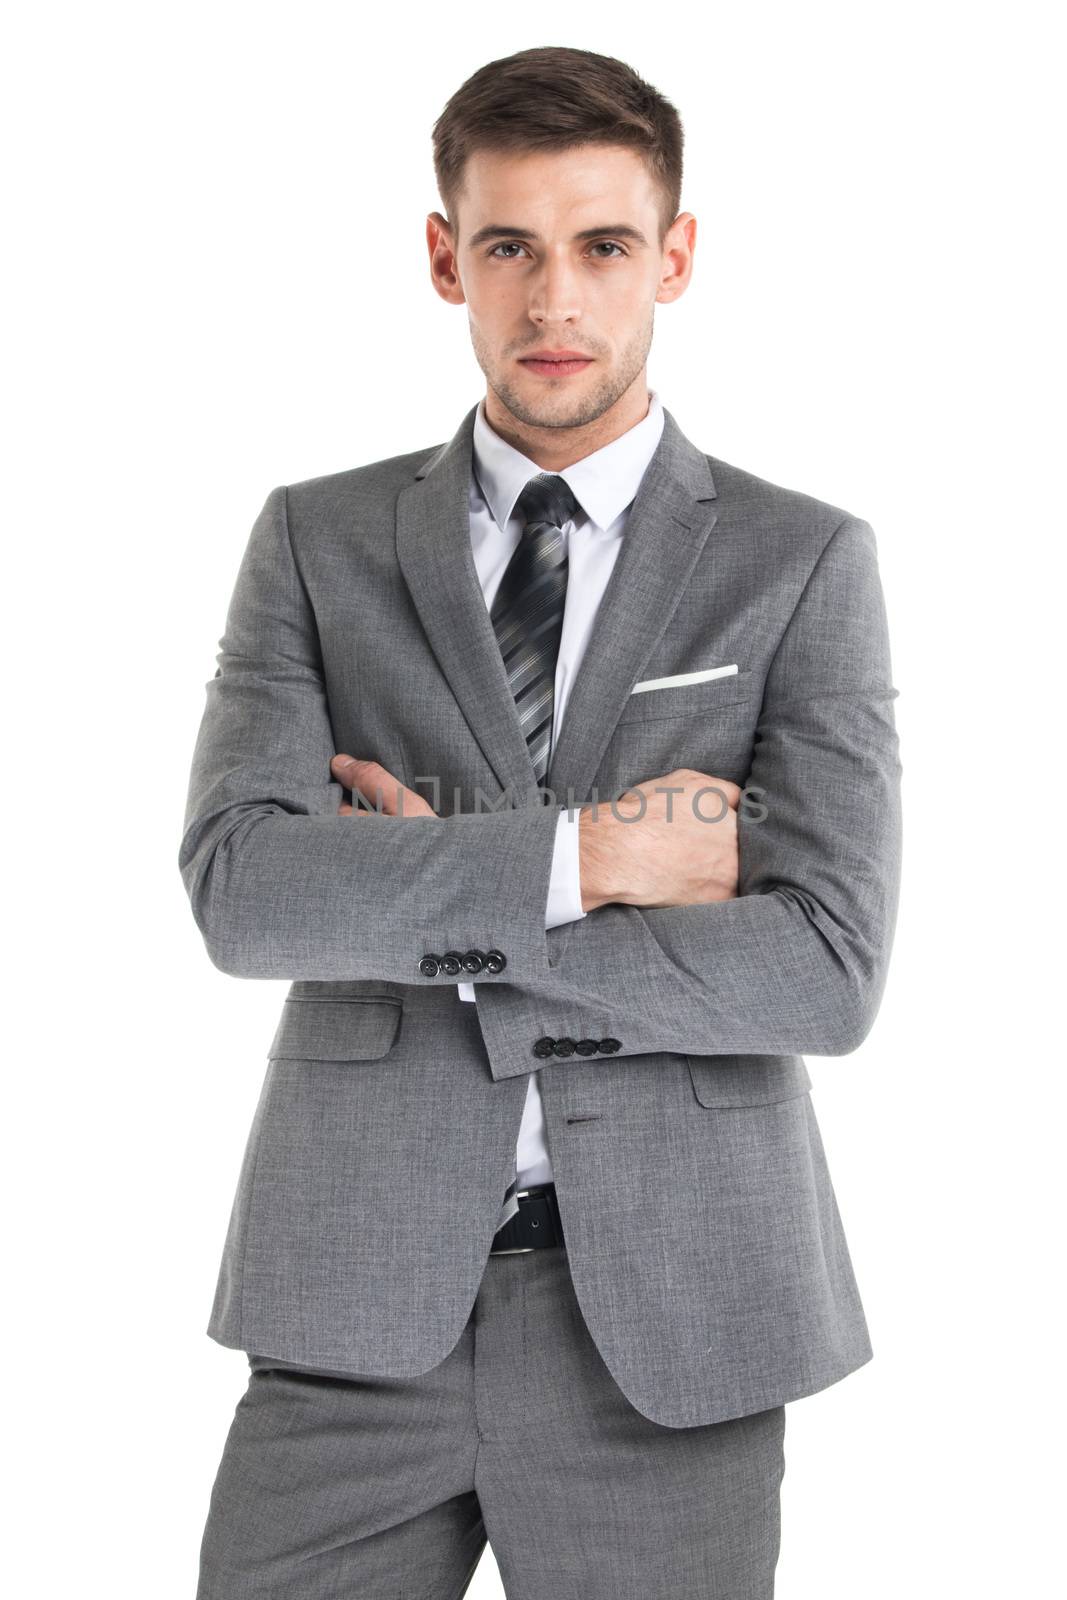 Portrait of a handsome young businessman in suit over white background